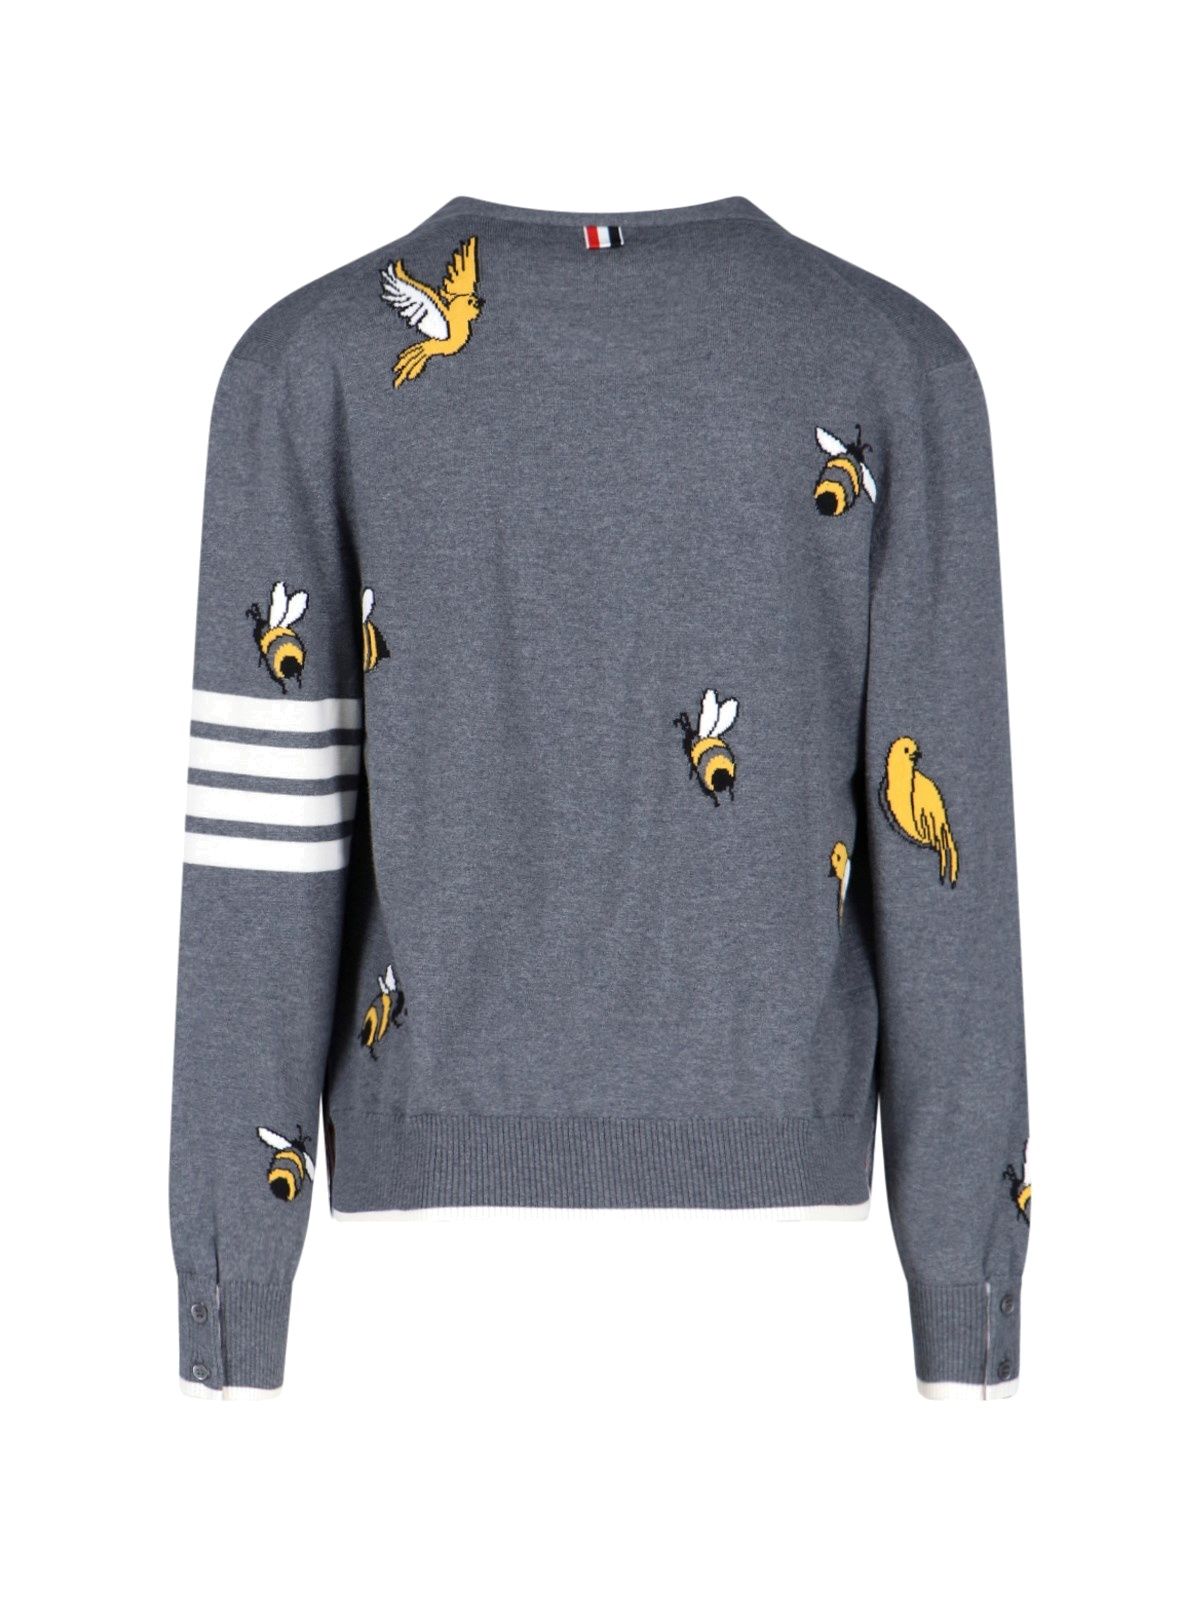 Cardigan "Birds and Bees"